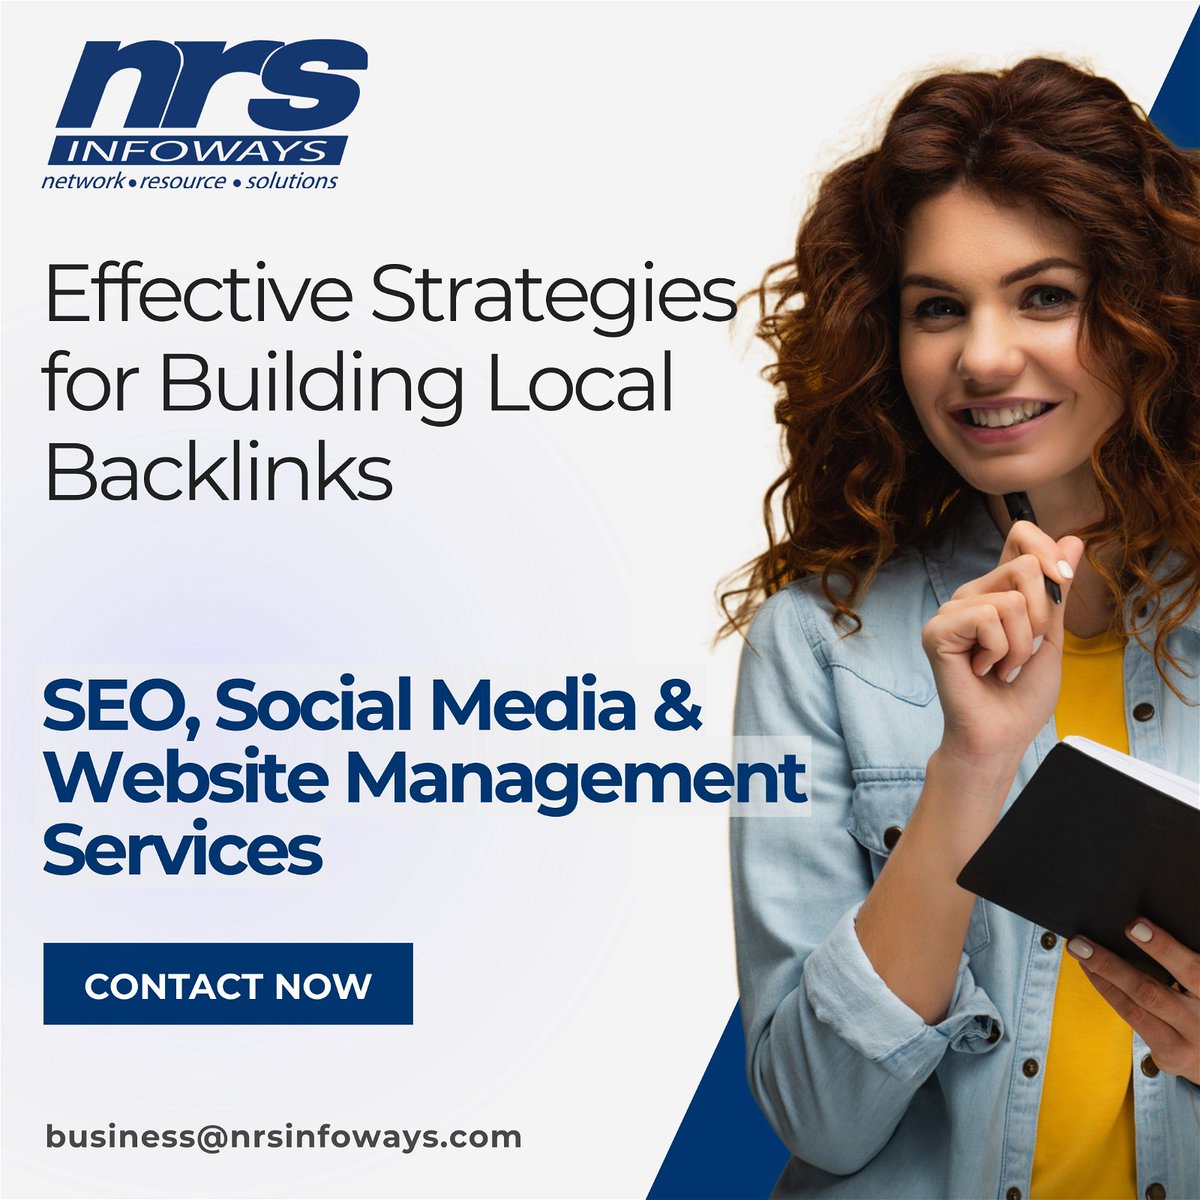 Effective Strategies for Building Local Backlinks

Engage in Local Networking
Support Local Causes and Events
Leverage Local Directories and Citations
and more...

We can help
Lets discuss business@nrsinfoways.com

#localbacklinks  #localdirectories  #seo #nrsinfoways